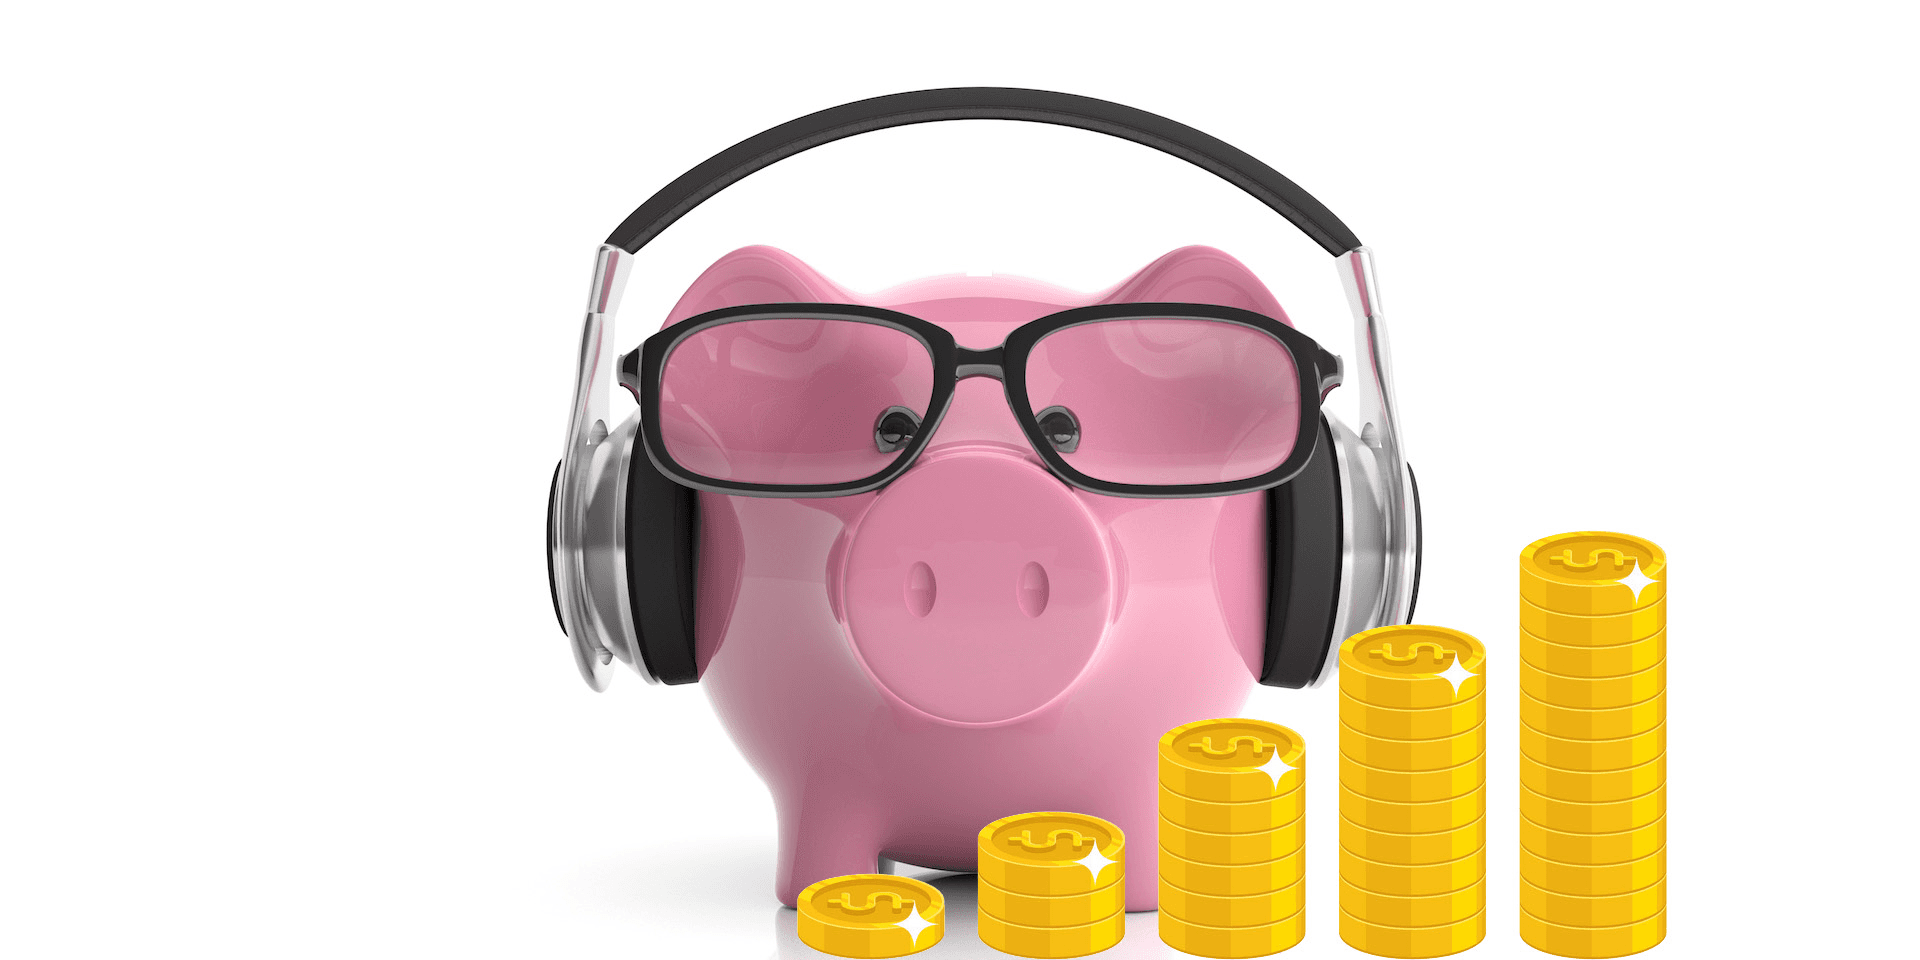 Save money on your music streaming service